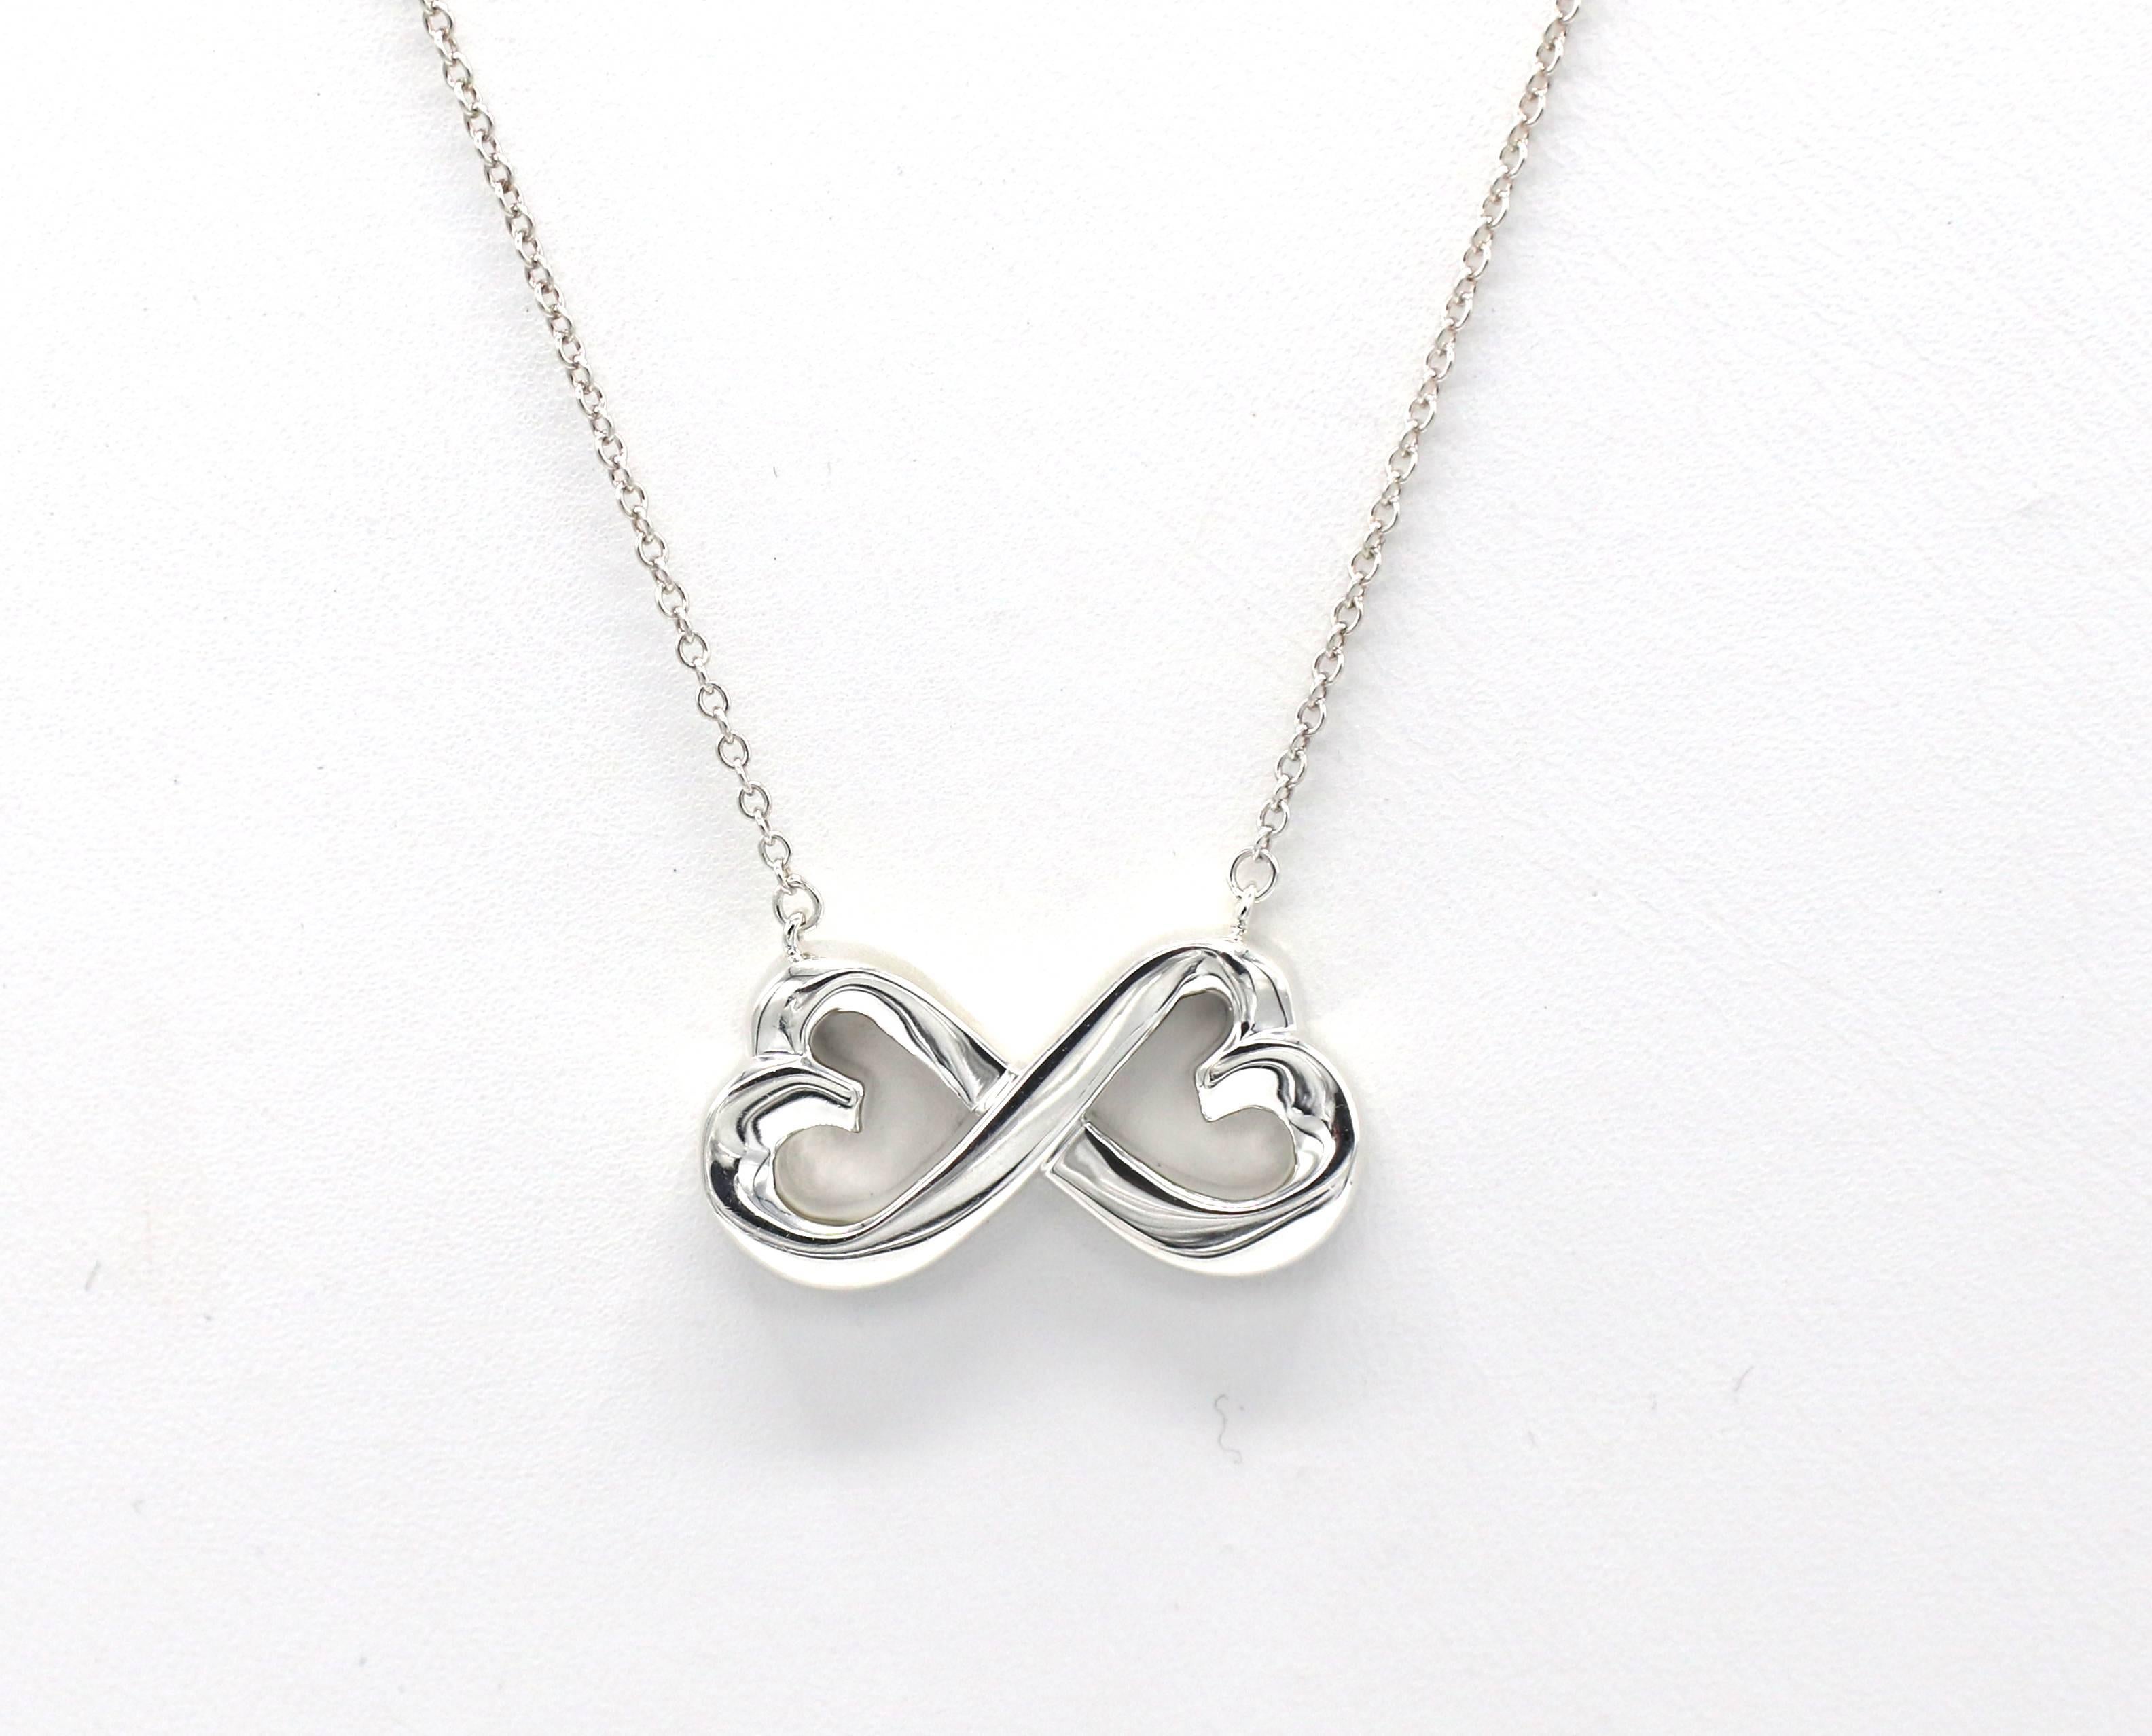 Tiffany & Co. Paloma Picasso Double Loving Heart Infinity Sterling Silver Necklace
Metal: Sterling silver 925
Weight: 4.65 grams
Length: 18.5 inches
Pendant: 22 x 11.5mm
Signed: Paloma Picasso Tiffany & Co. 925